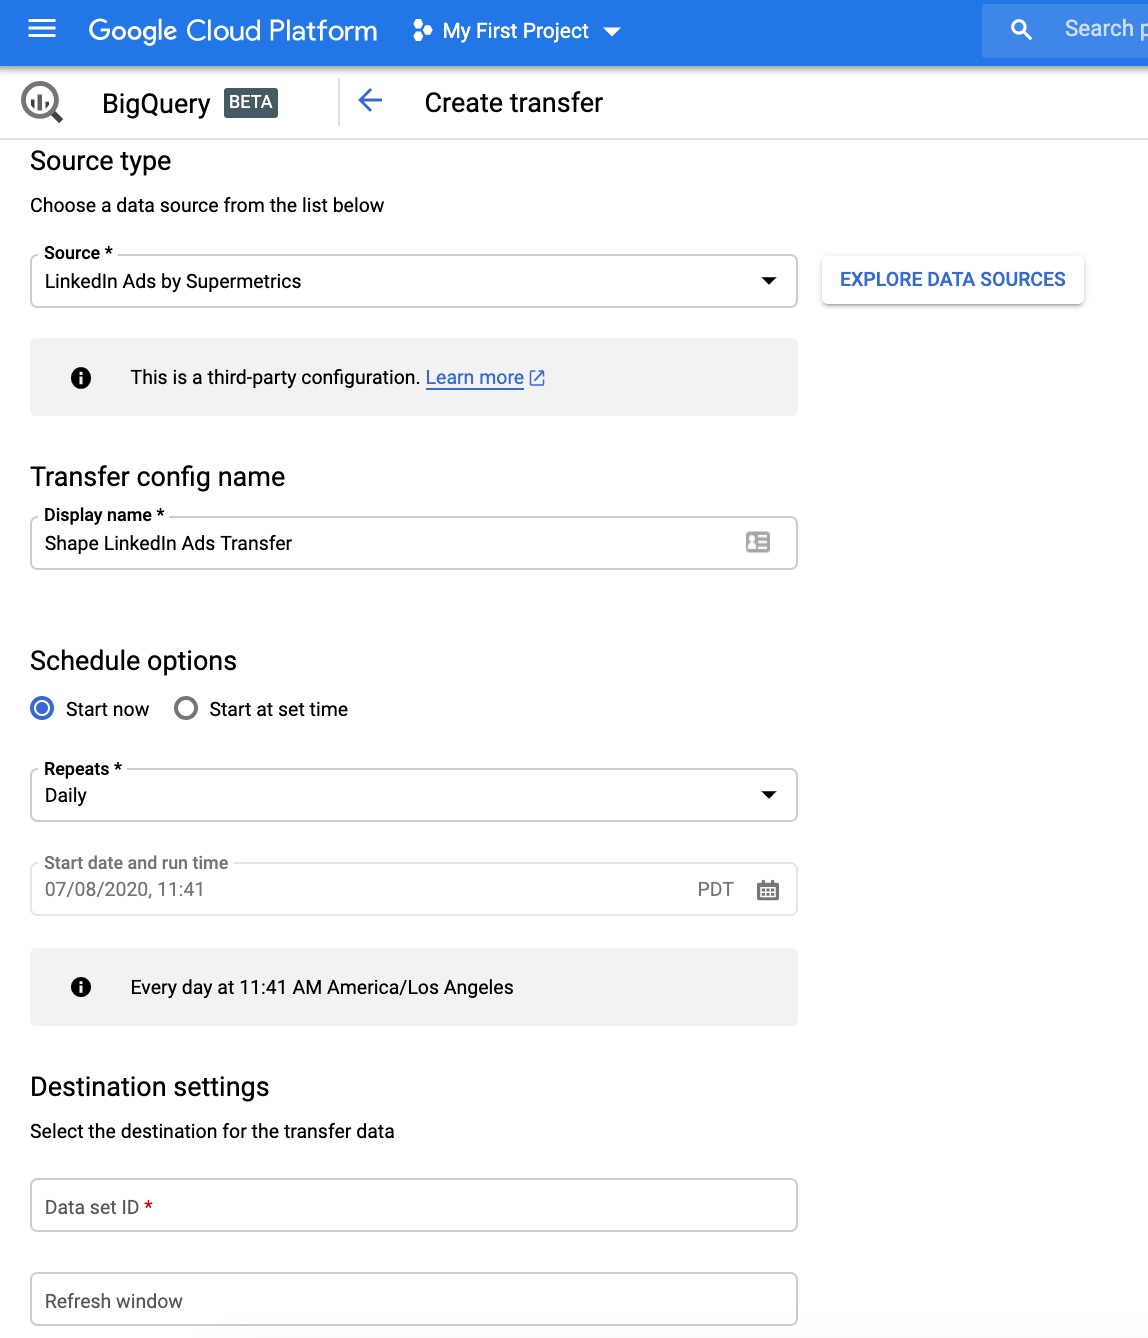 Google Big Query interface showing the Create Transfer form and necessary settings